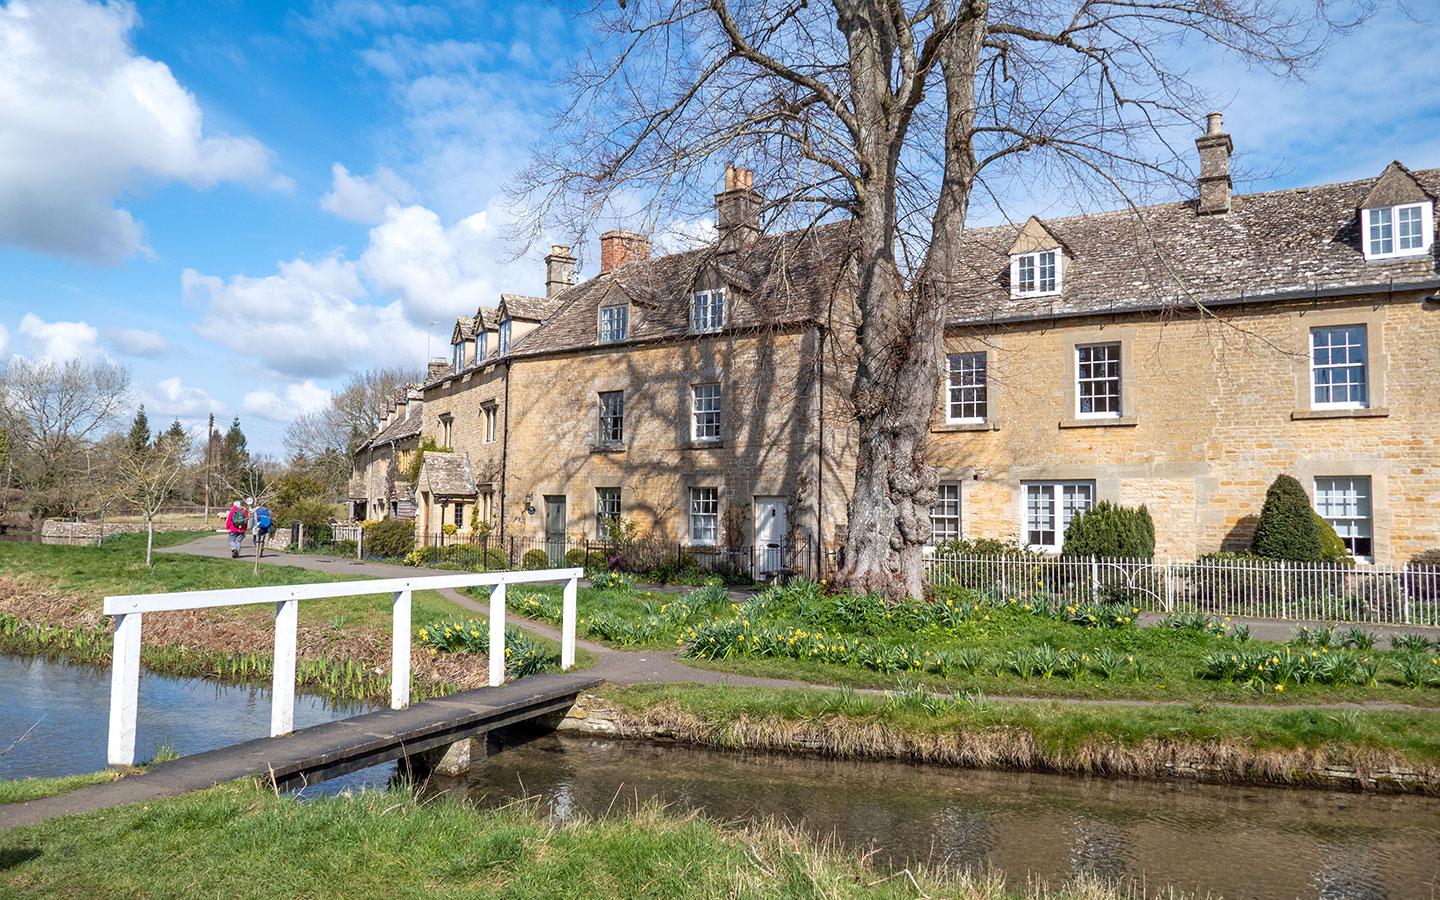 Bourton-on-the-Water to the Slaughters walk in the Cotswolds (5.4 miles circular)